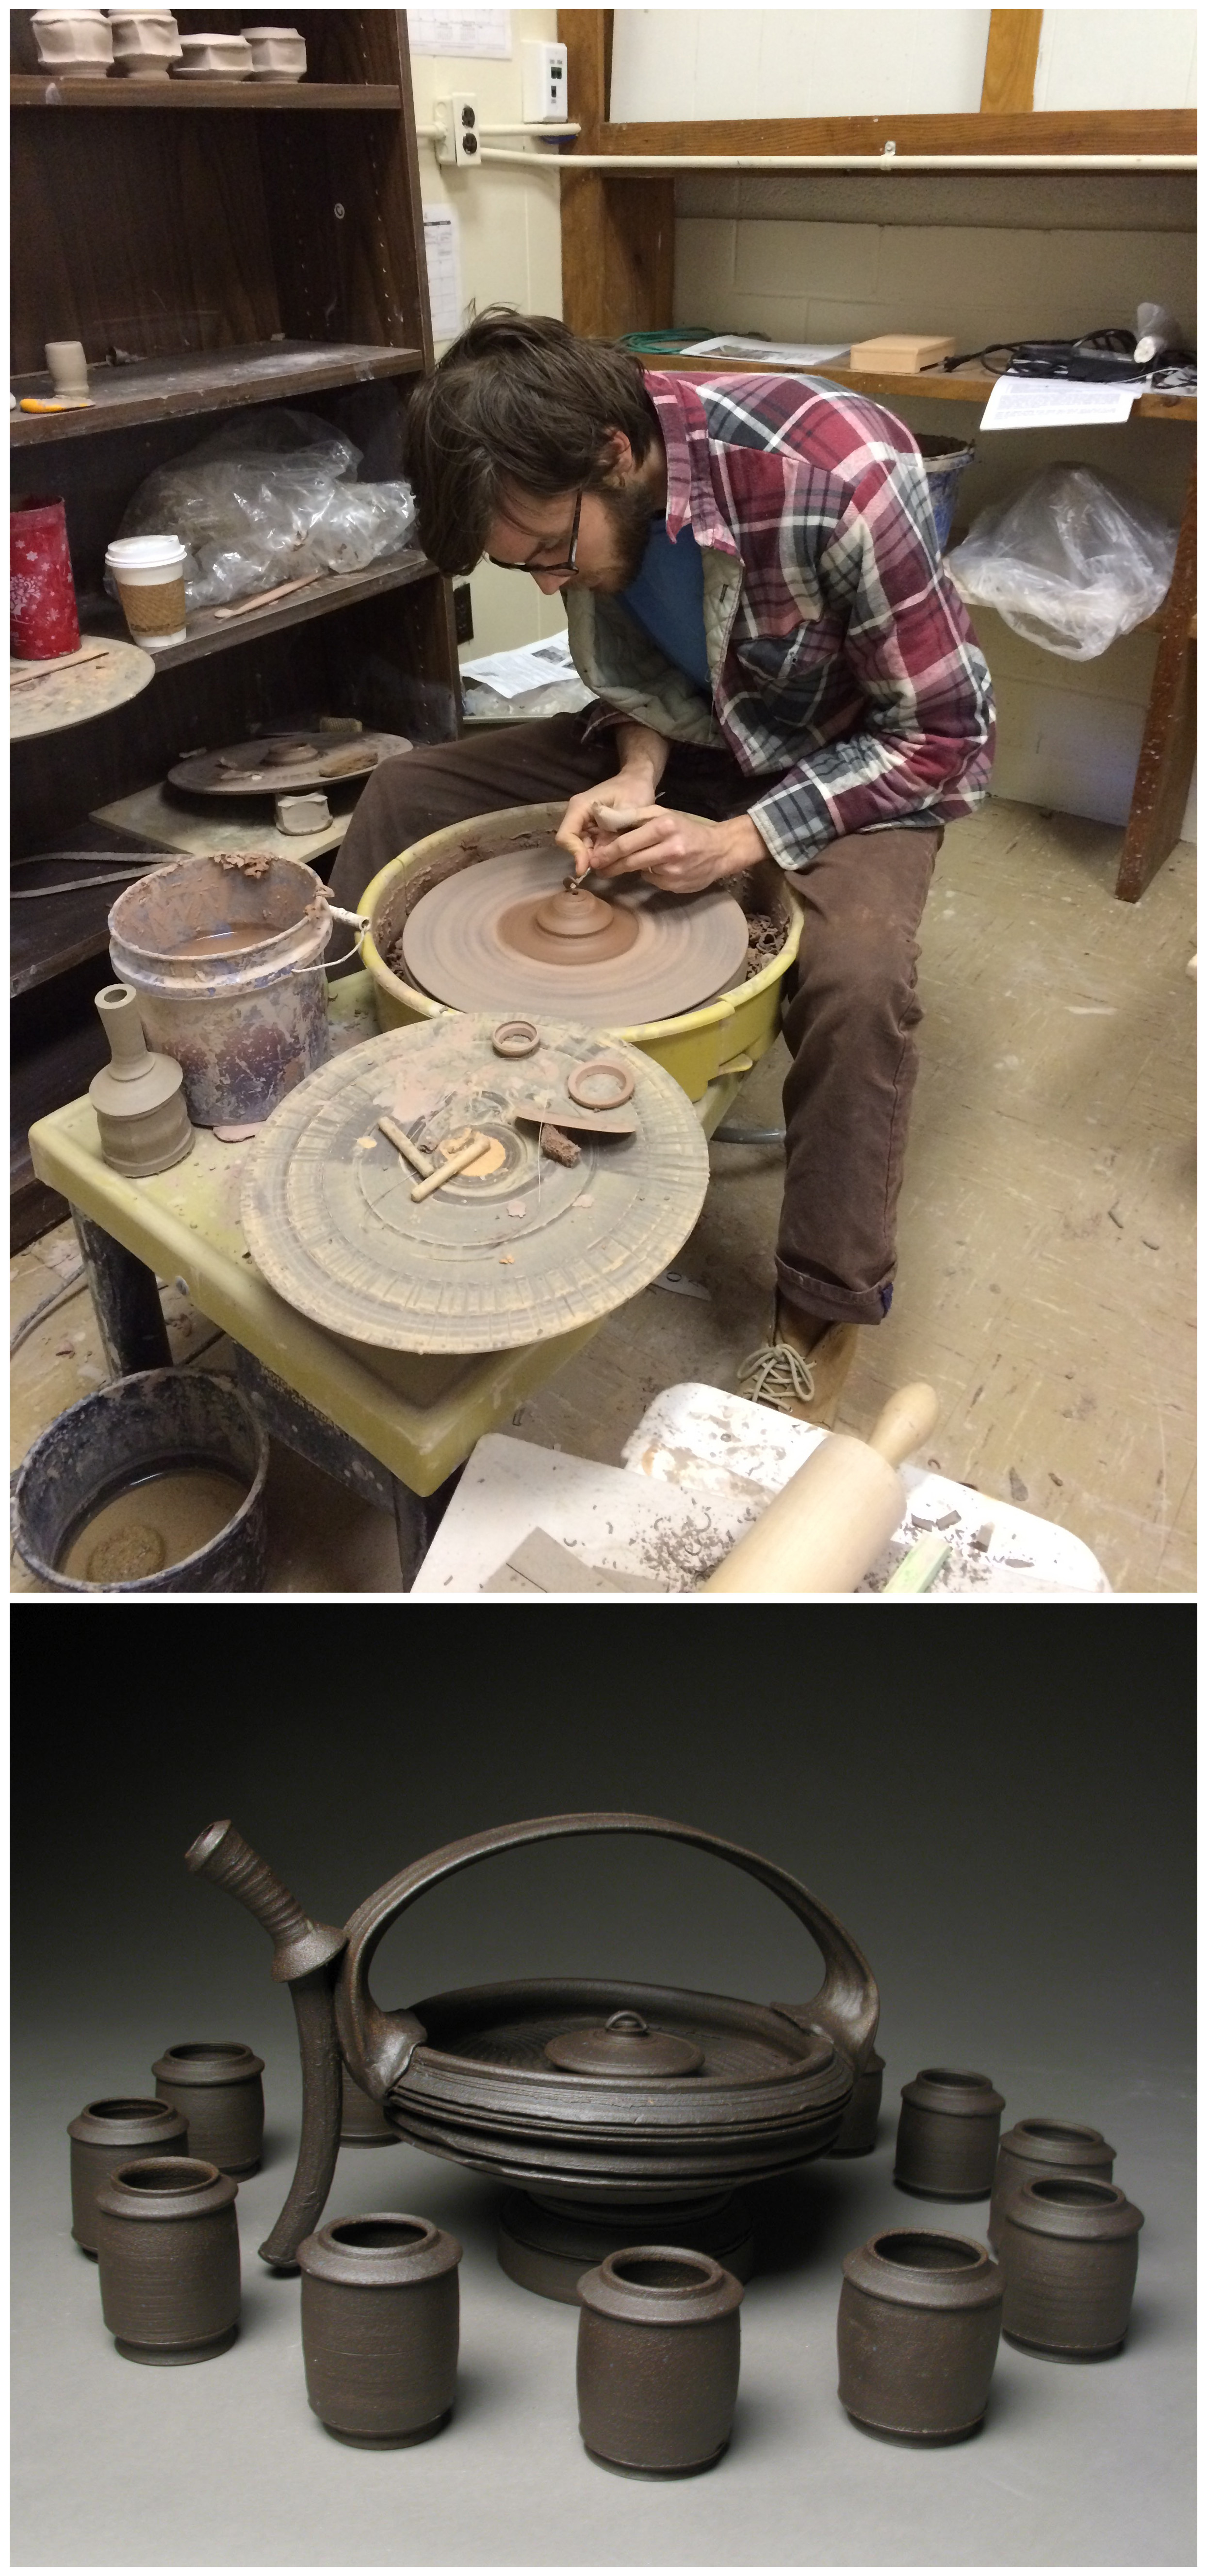 Graduating MSU art major Michael Wilkerson of Tupelo works on one of his ceramic pieces being featured in his upcoming thesis exhibition, "From Nothingness."